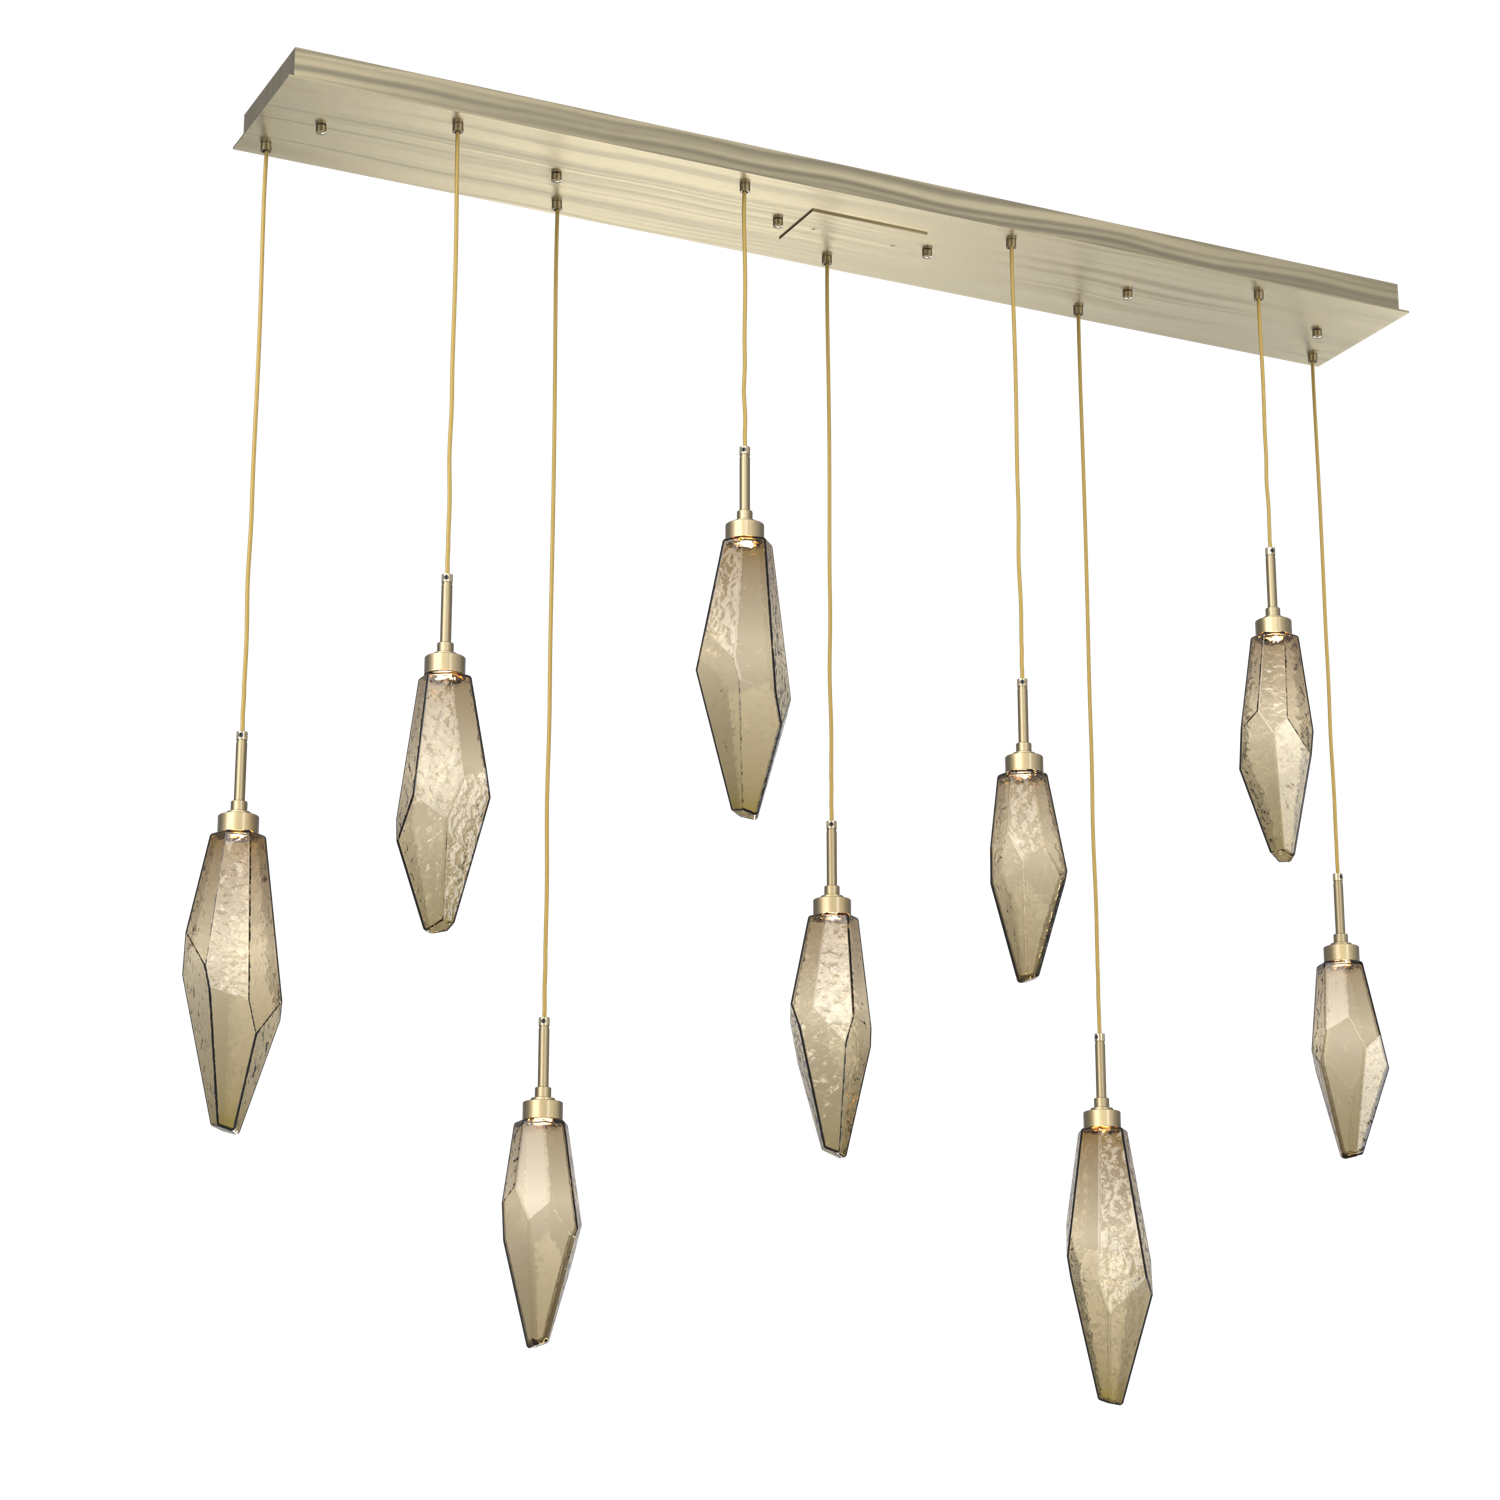 PLB0050-09-HB-CB-Hammerton-Studio-Rock-Crystal-9-light-linear-pendant-chandelier-with-heritage-brass-finish-and-chilled-bronze-blown-glass-shades-and-LED-lamping